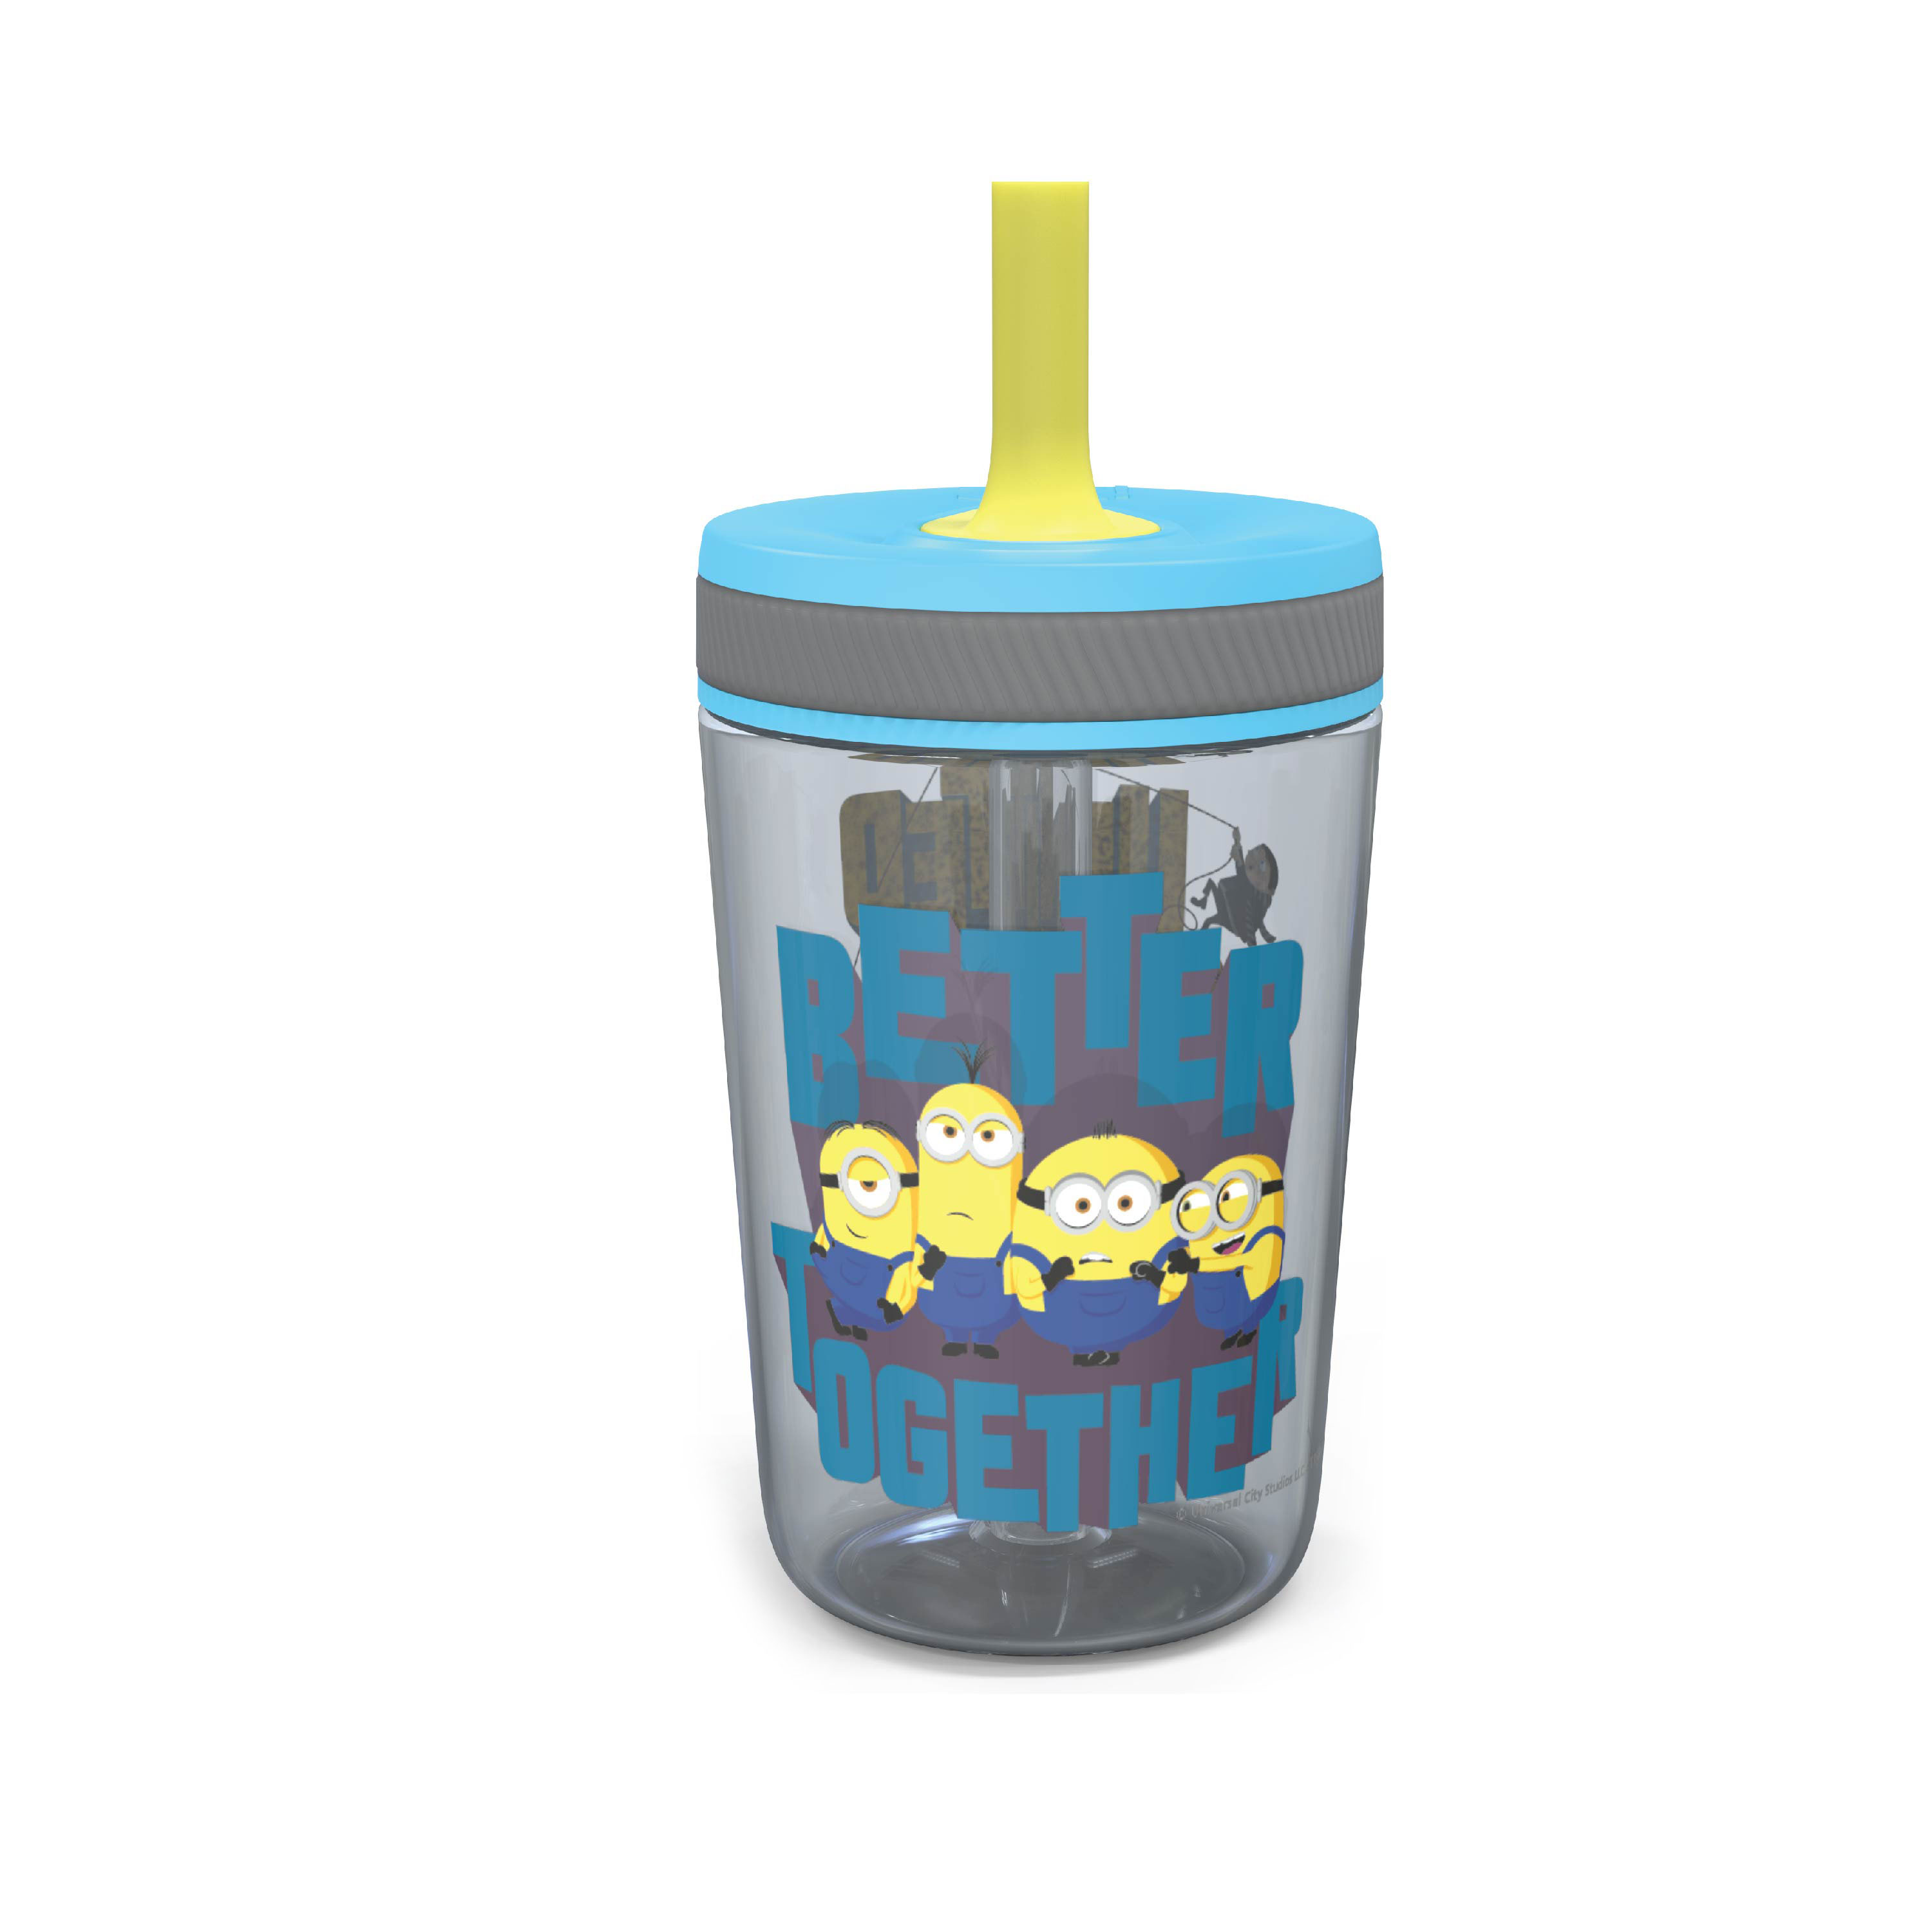 Minions 2 Movie 15  ounce Plastic Tumbler with Lid and Straw, Minions, 2-piece set slideshow image 3